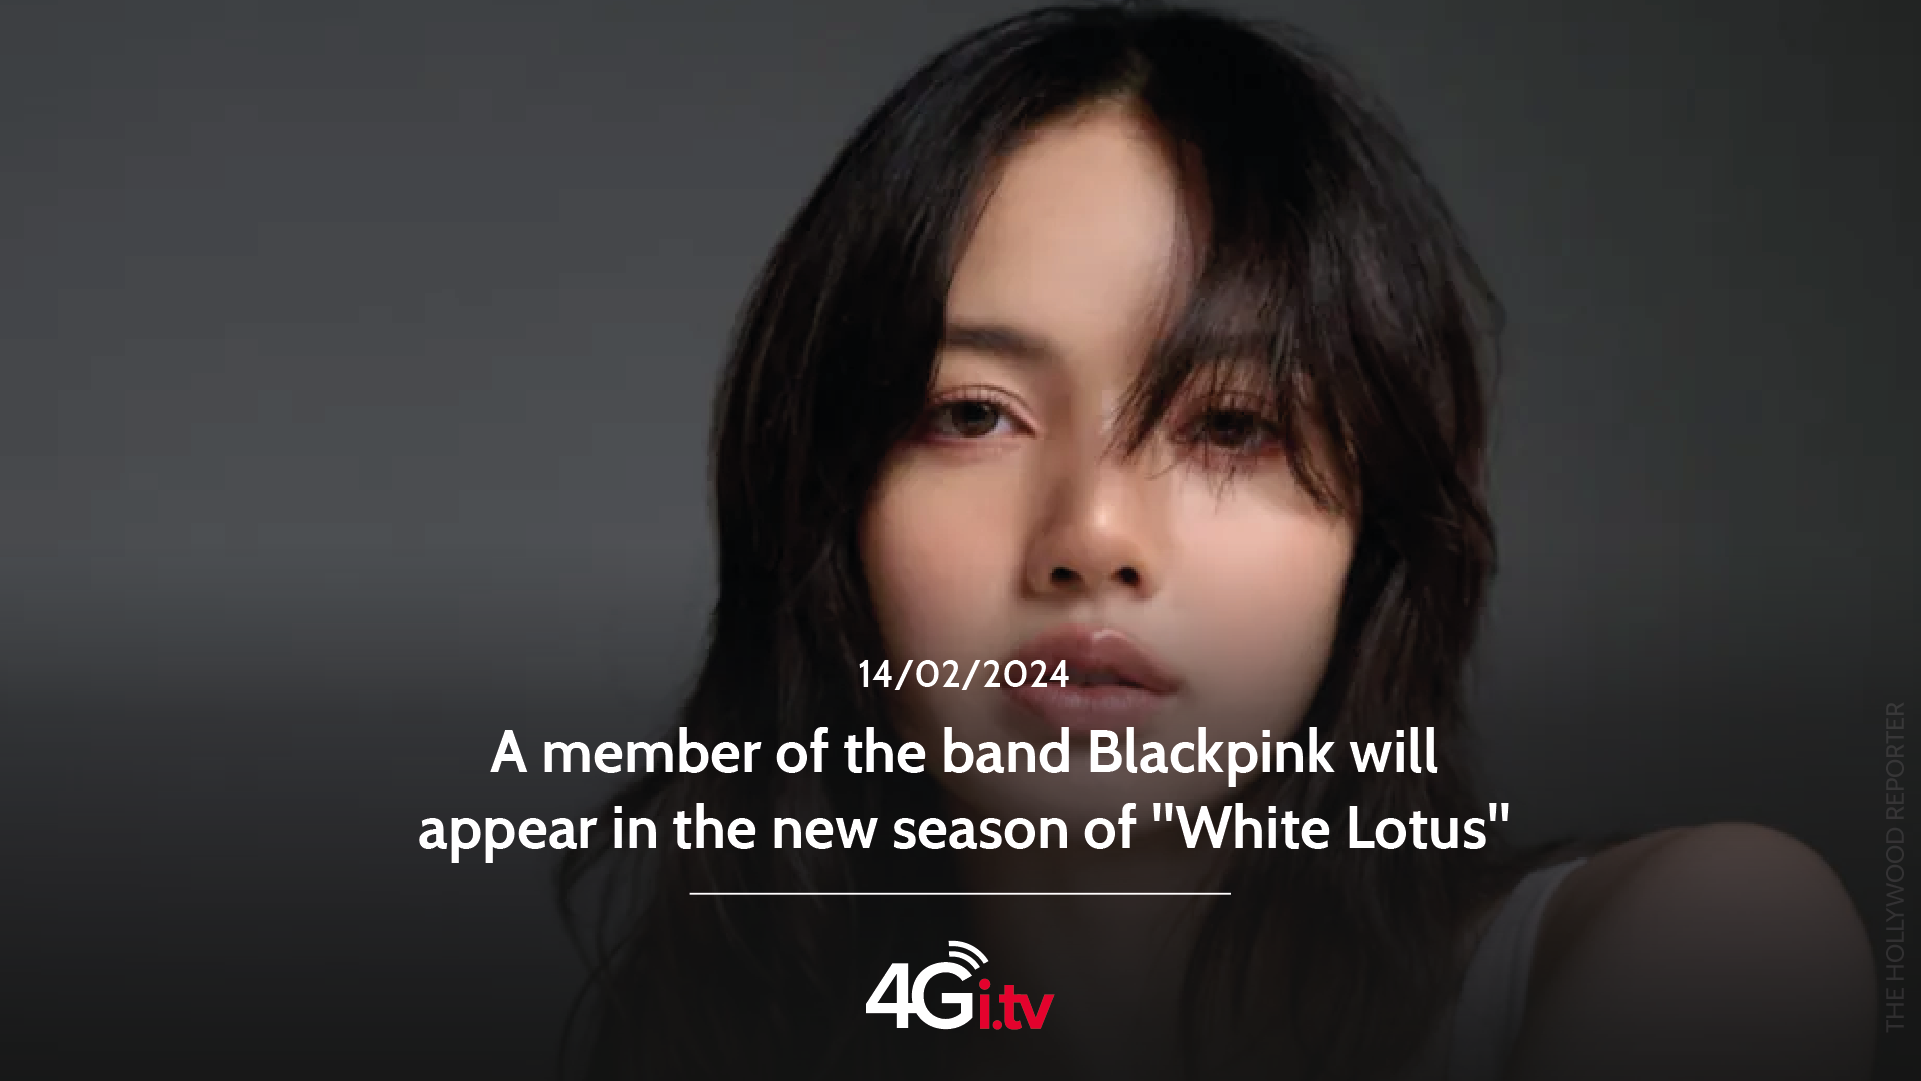 Подробнее о статье A member of the band Blackpink will appear in the new season of “White Lotus” 